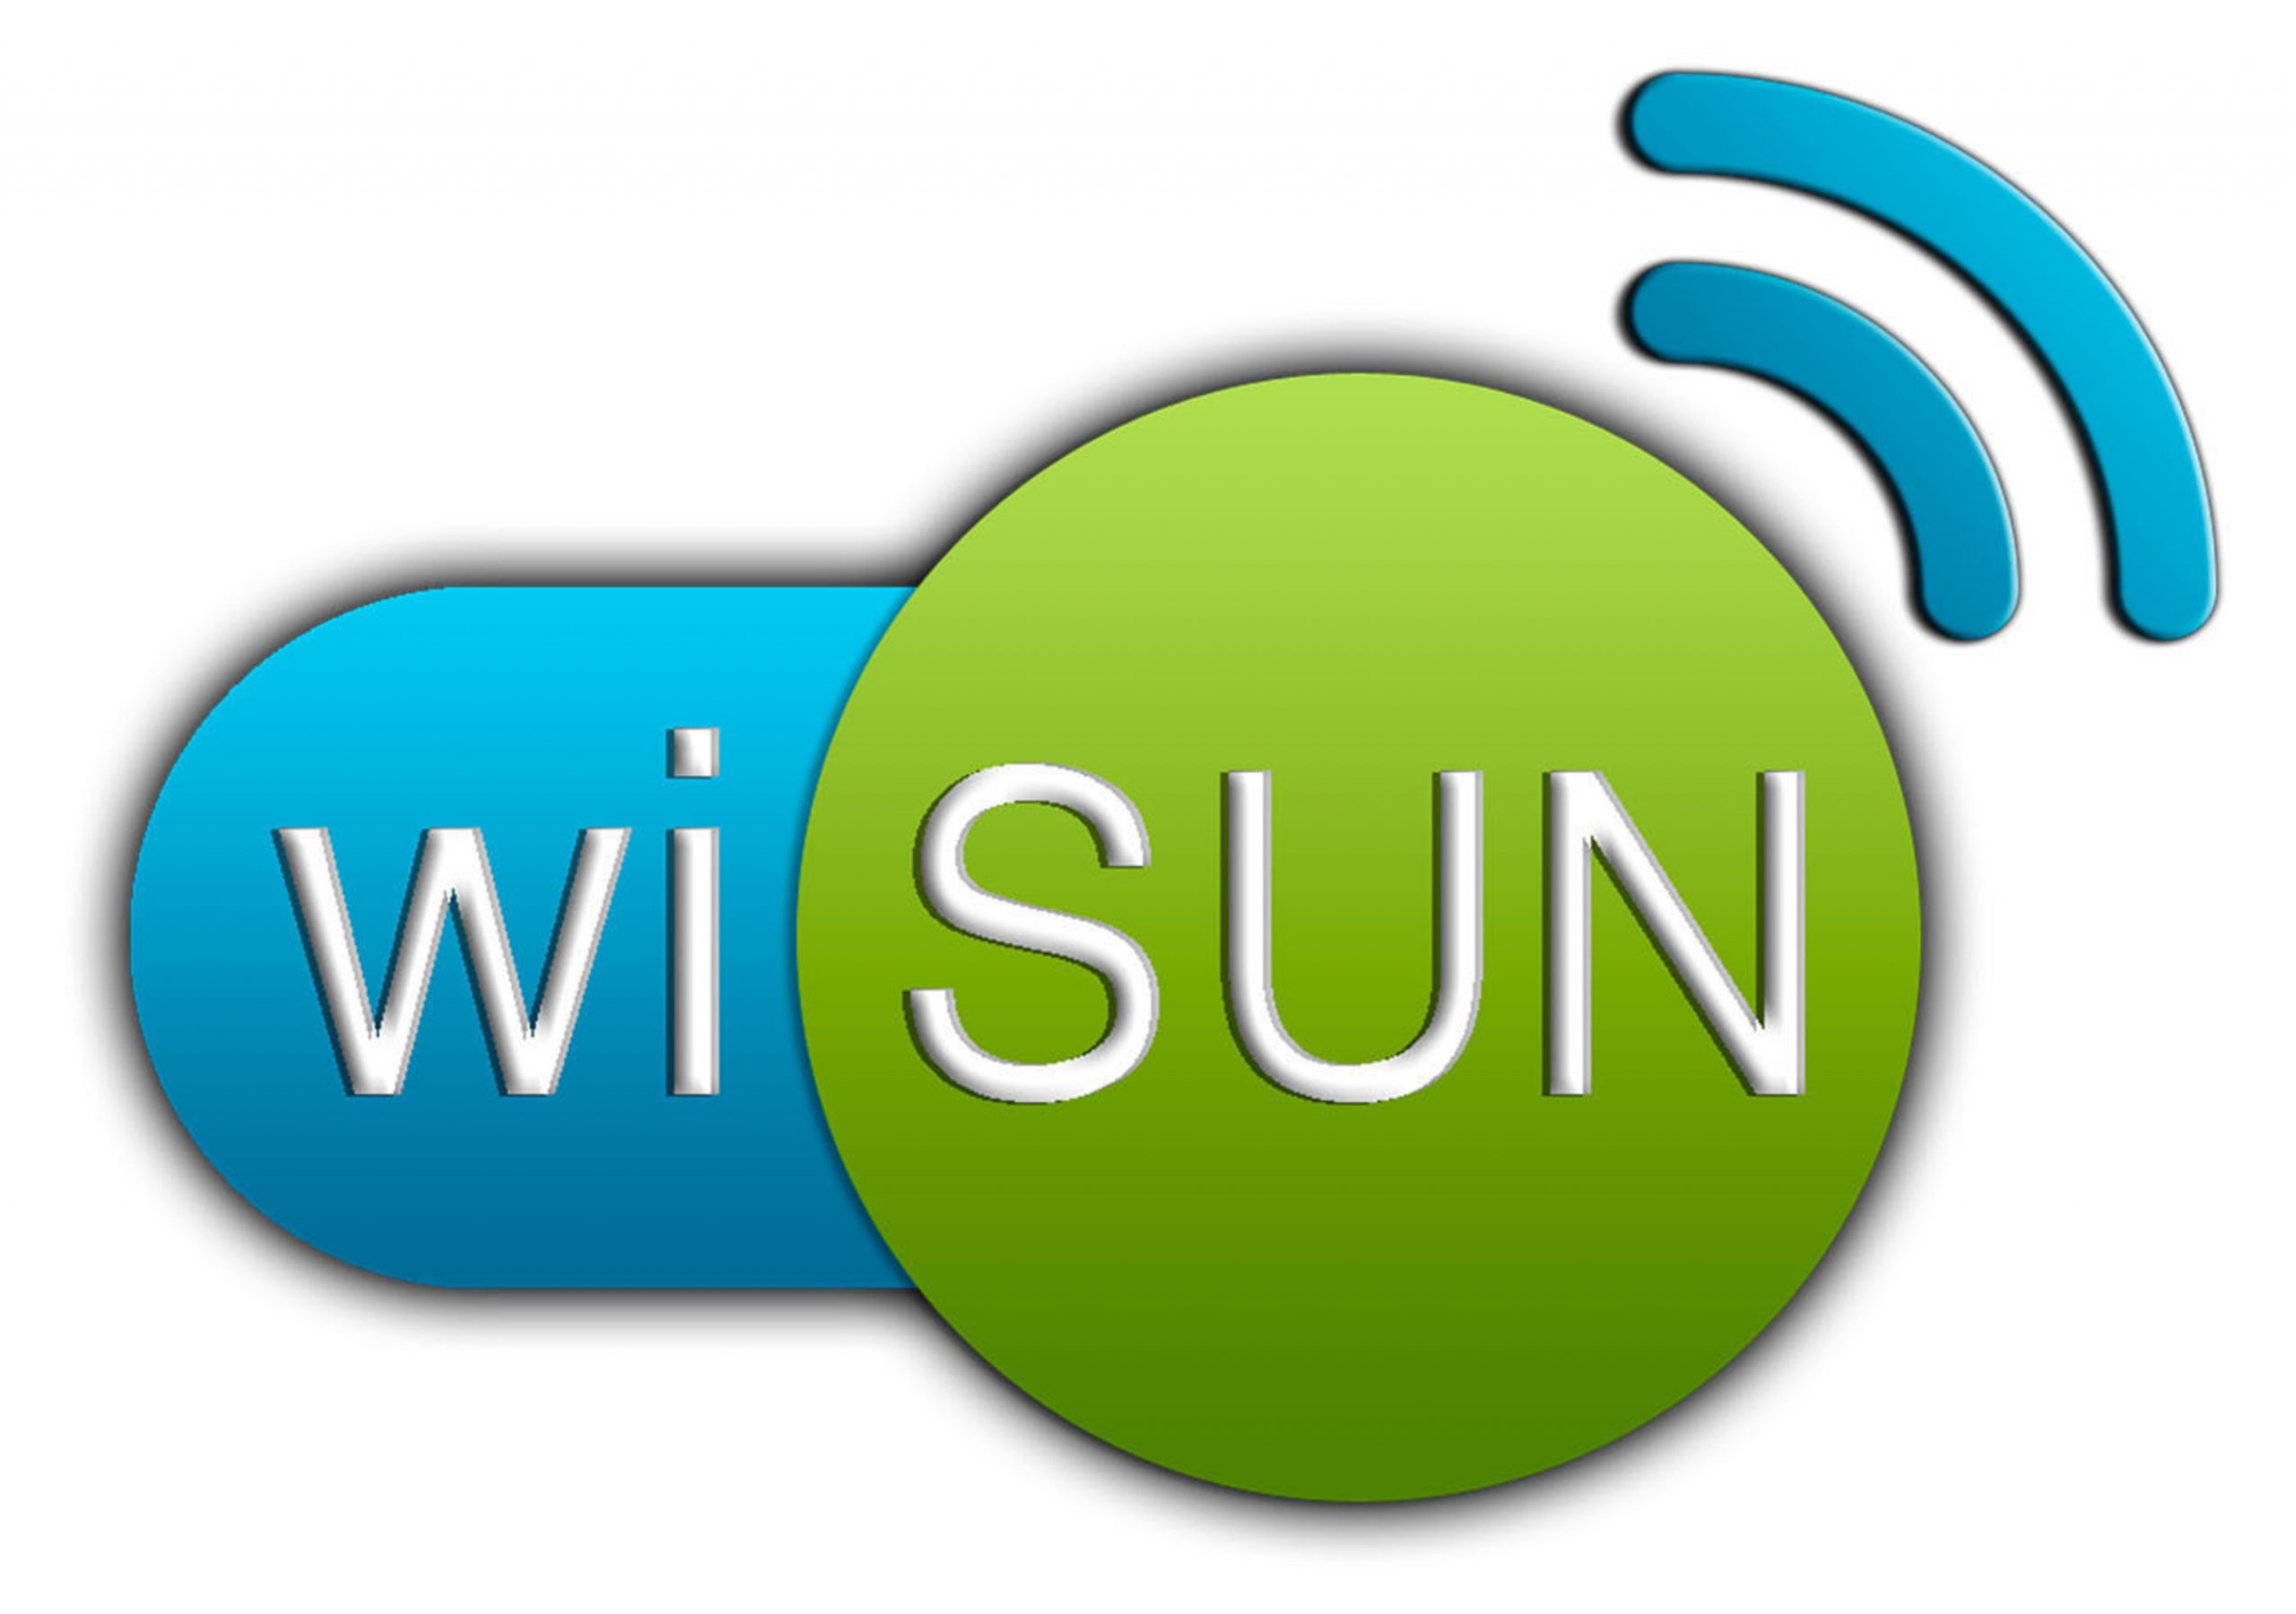 Wi-SUN for Smart Utility and Smart City